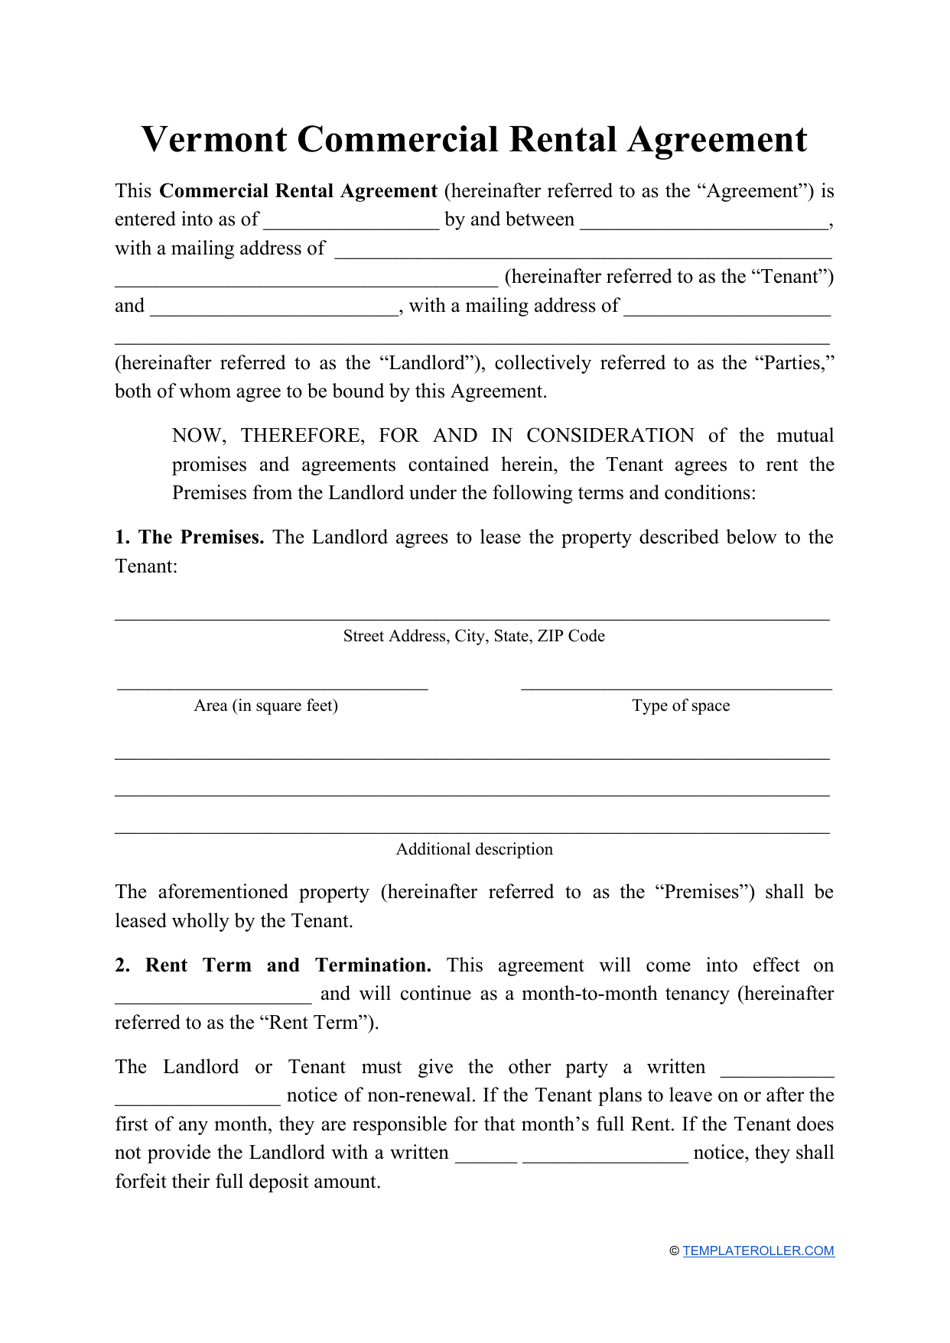 Commercial Rental Agreement Template - Vermont, Page 1